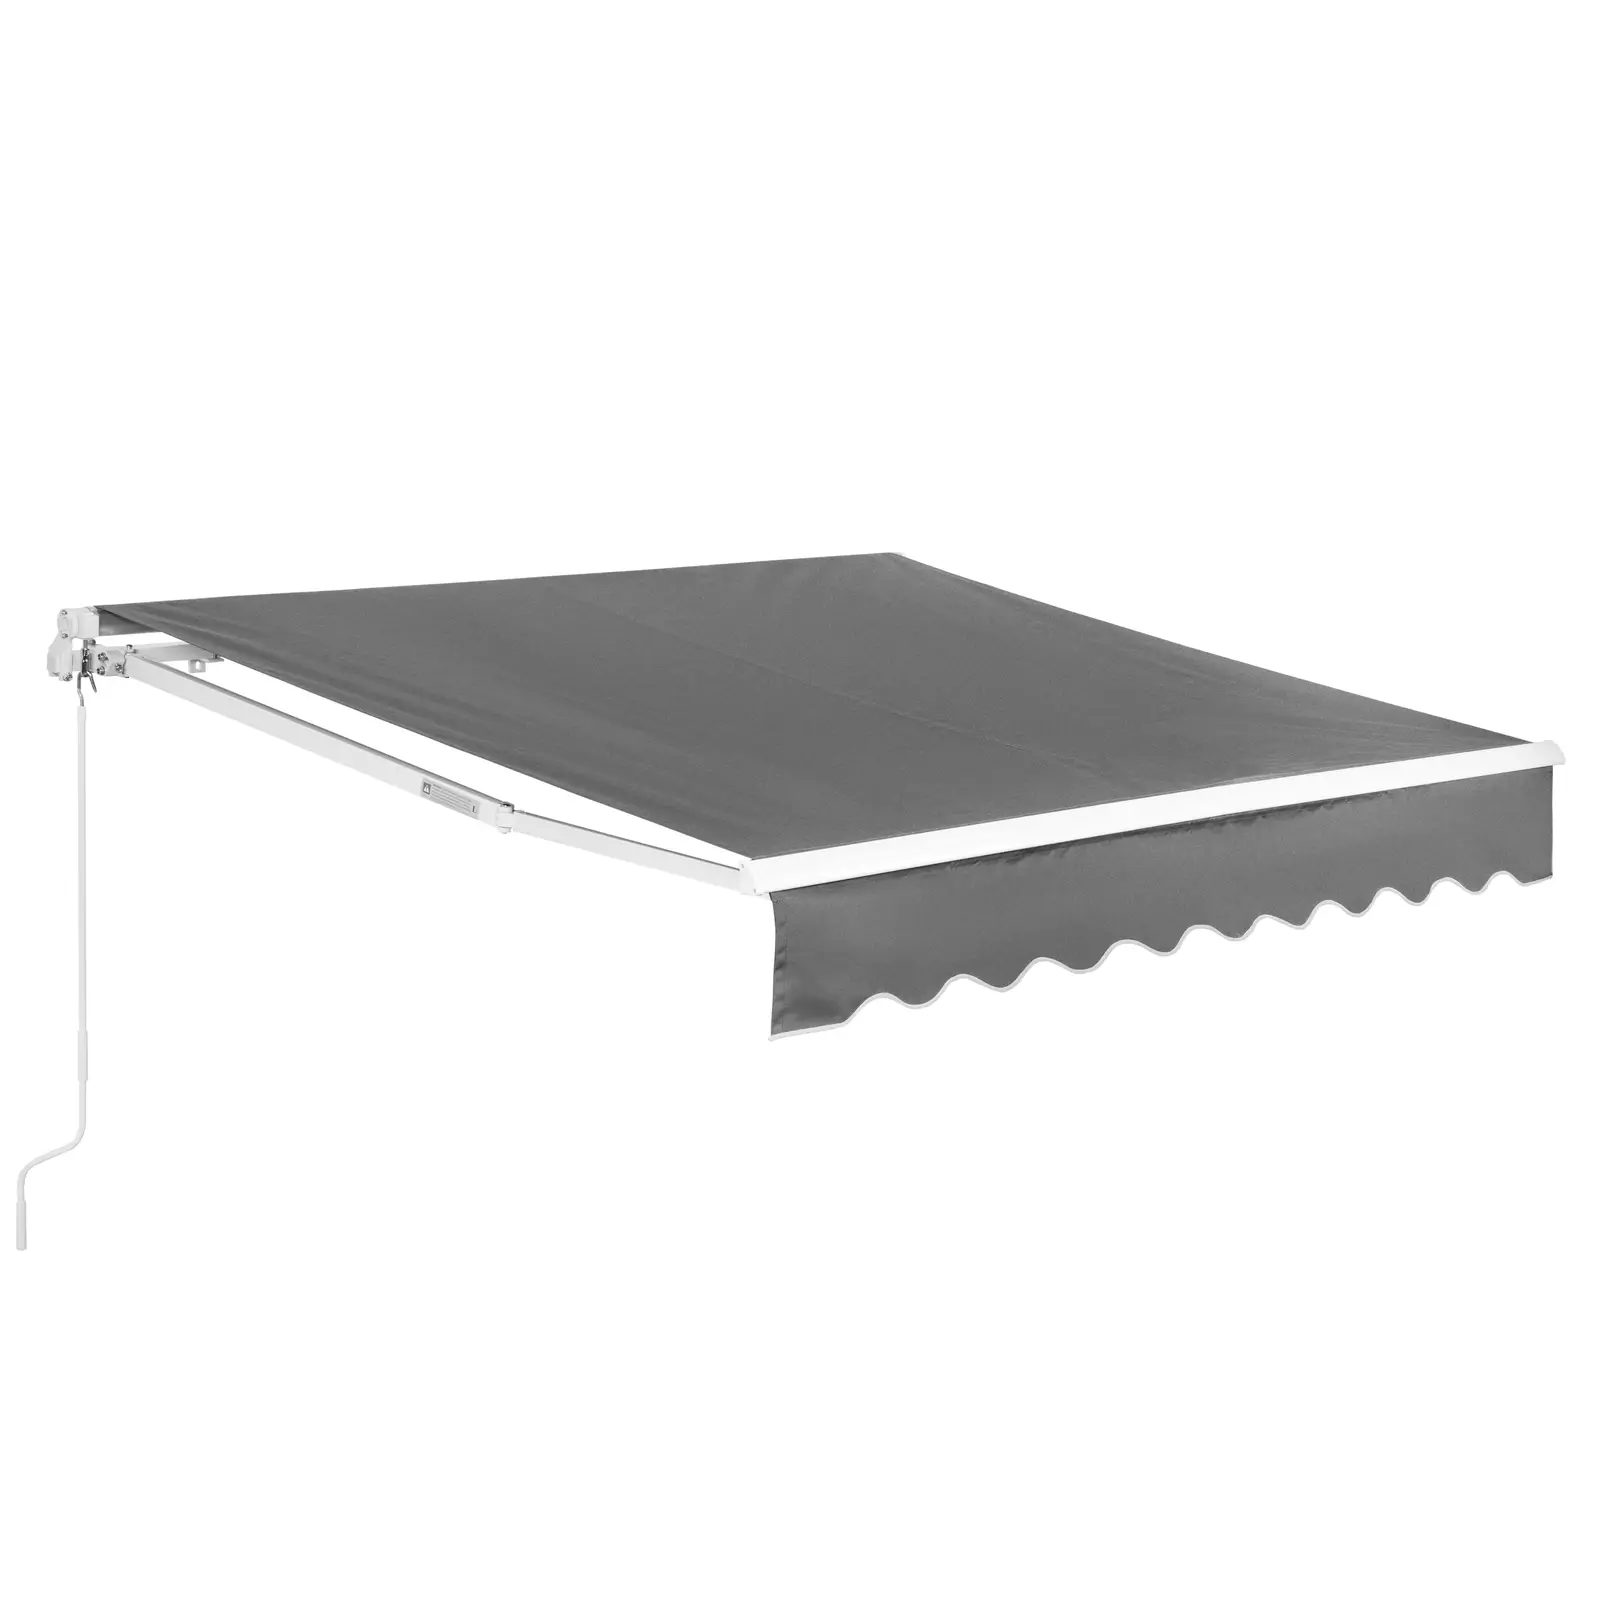 Factory second Clamp Awning - for balcony / terrace - manual - 200 x 250 cm - UV-resistant - anthracite grey